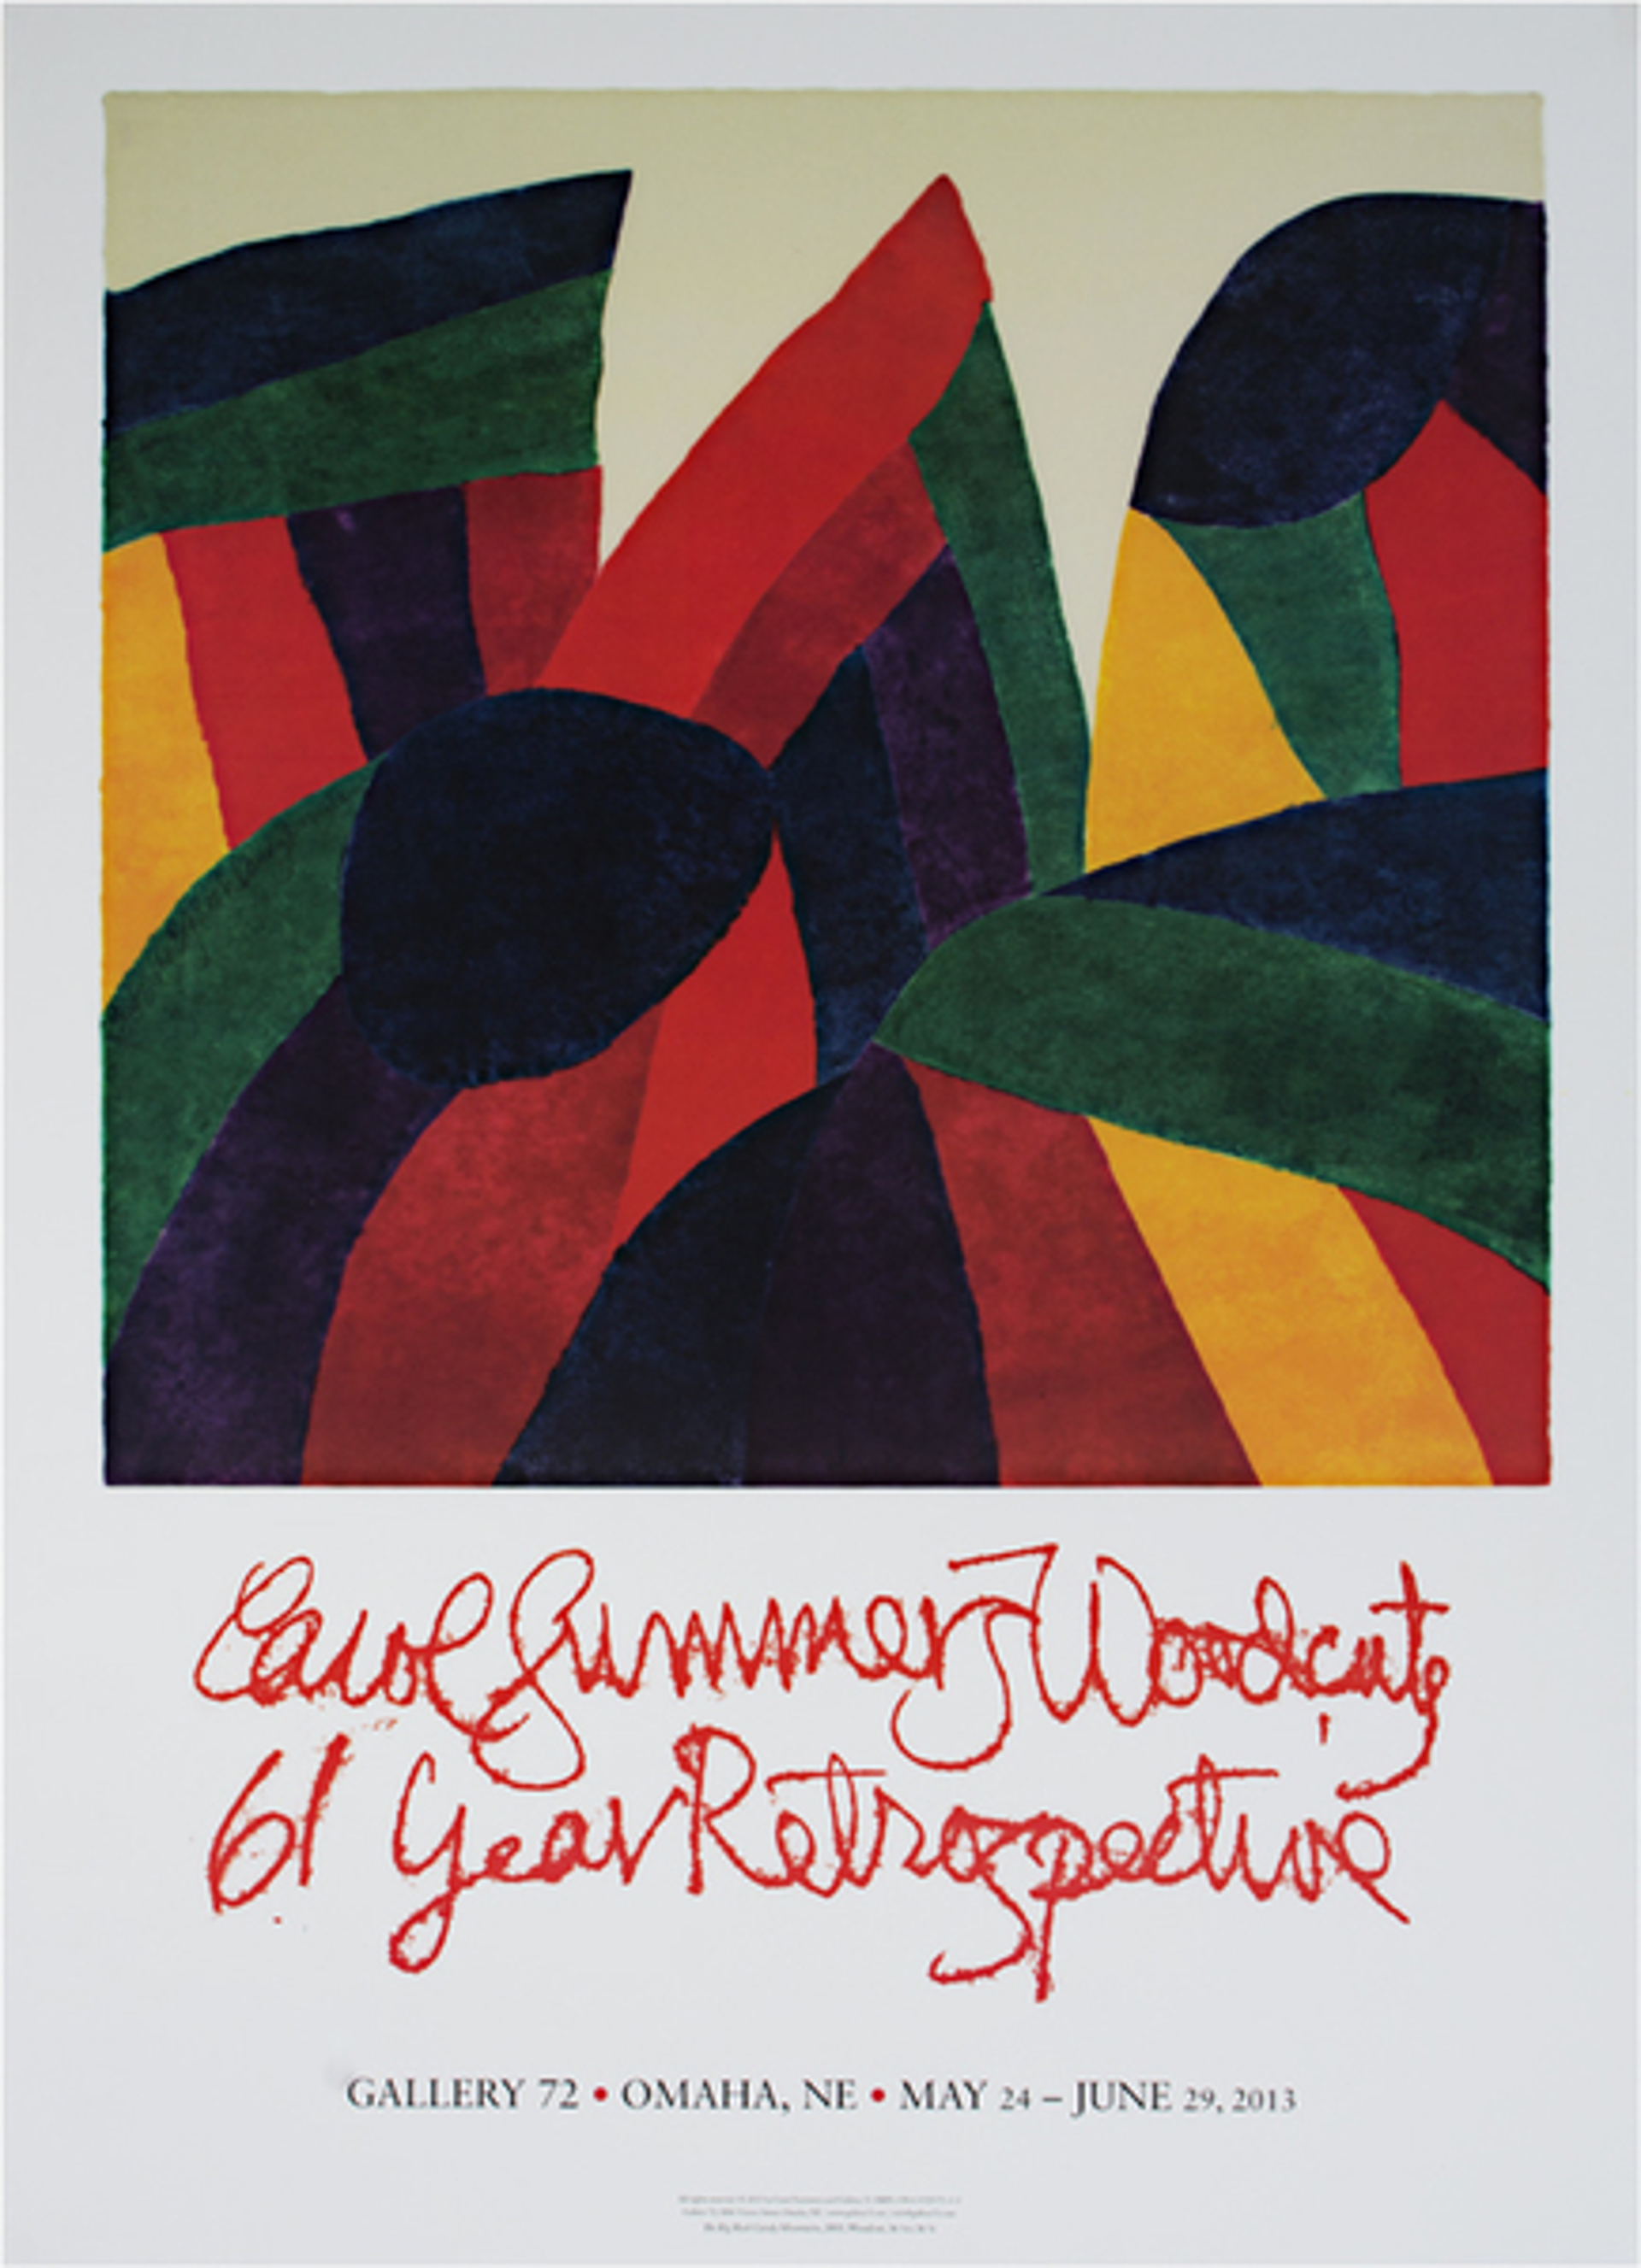 The Big Rock Candy Mountains (Carol Summers Woodcuts 61 Year Retrospective) by Carol Summers